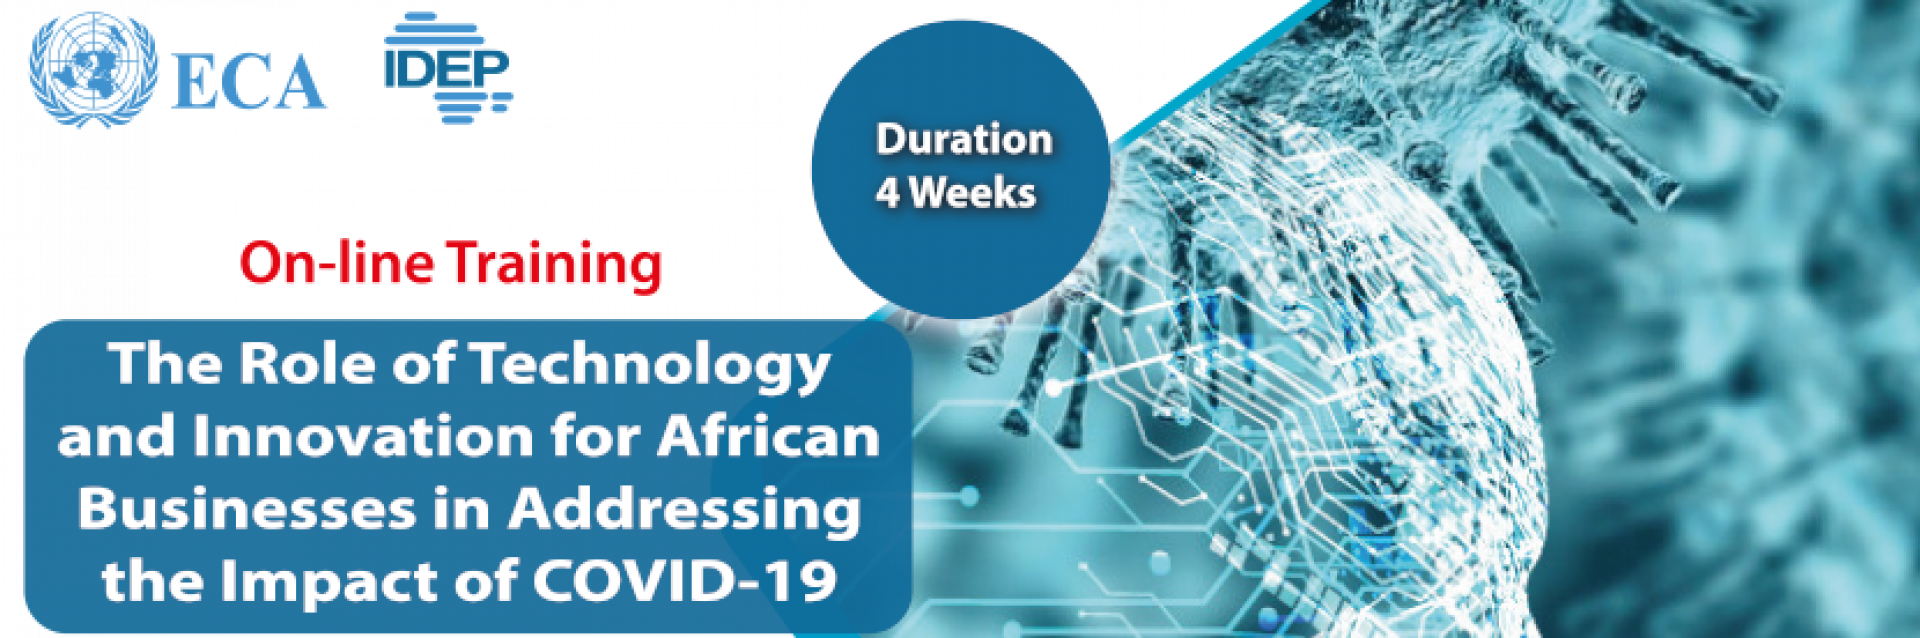 The Role of Technology and Innovation for African Businesses in Addressing the Impact of COVID-19